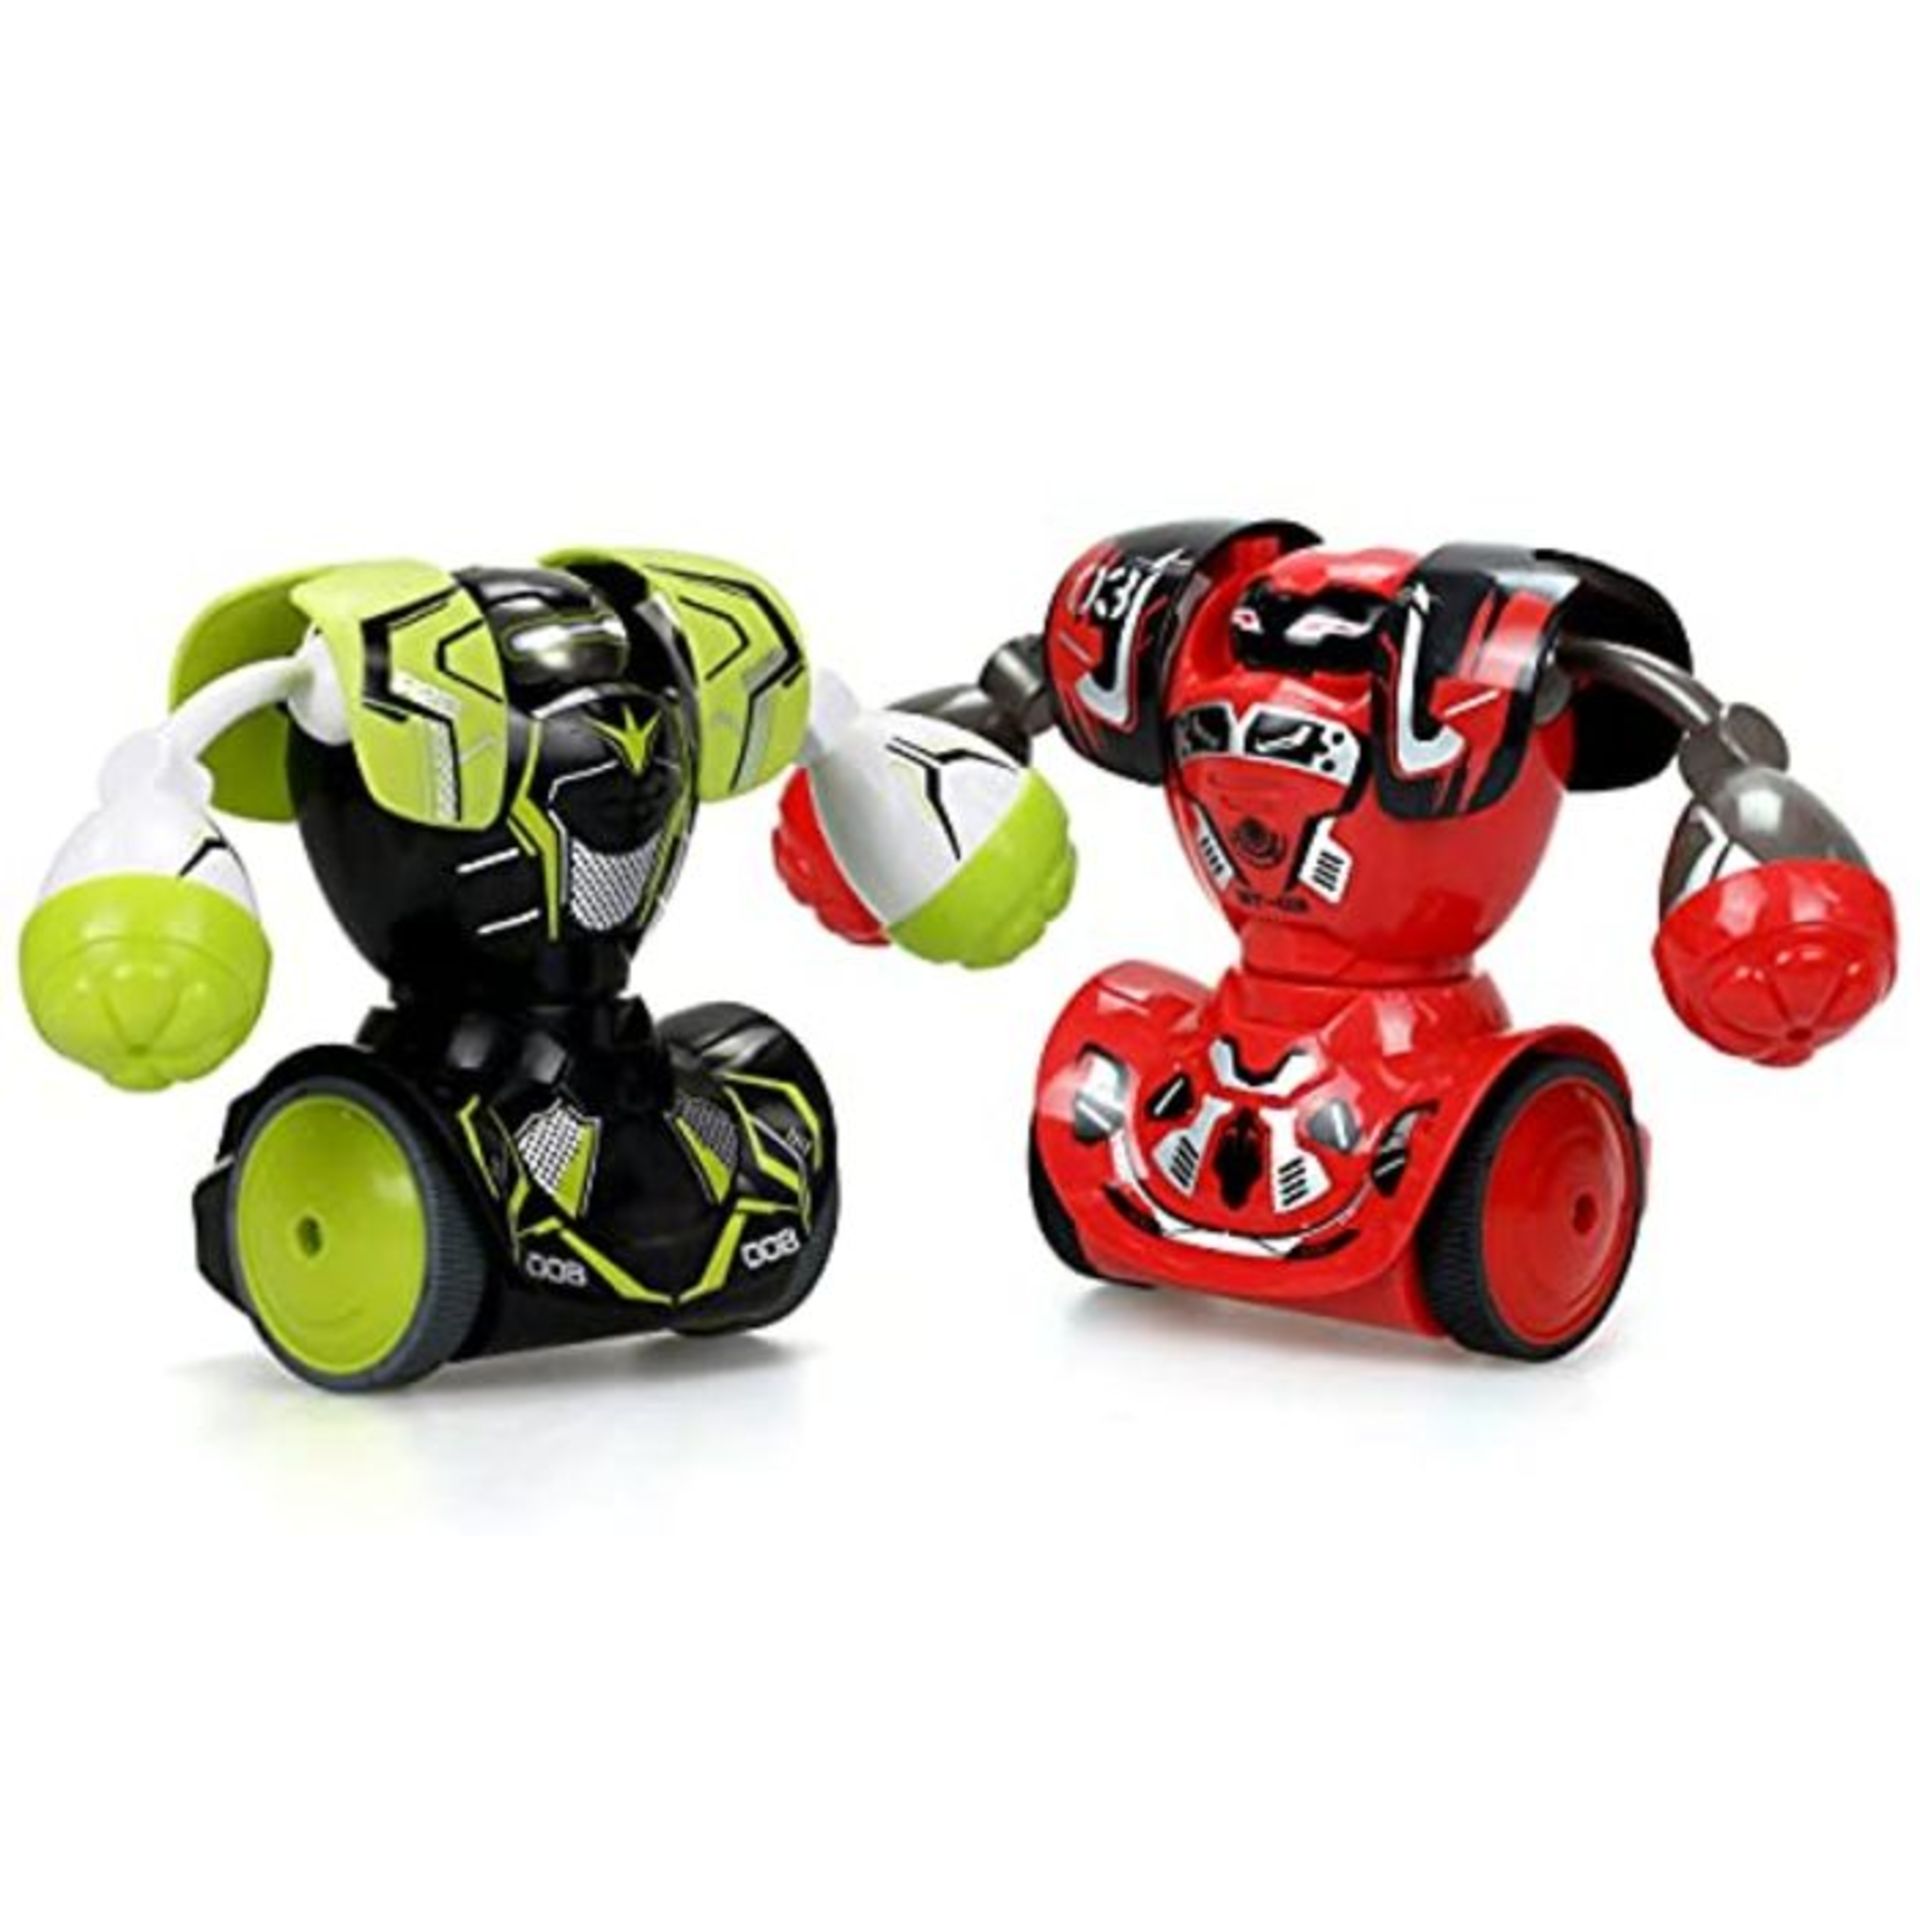 SilverLit Robo Kombat Twin Pack ( 1 Green and 1 Red Robot)